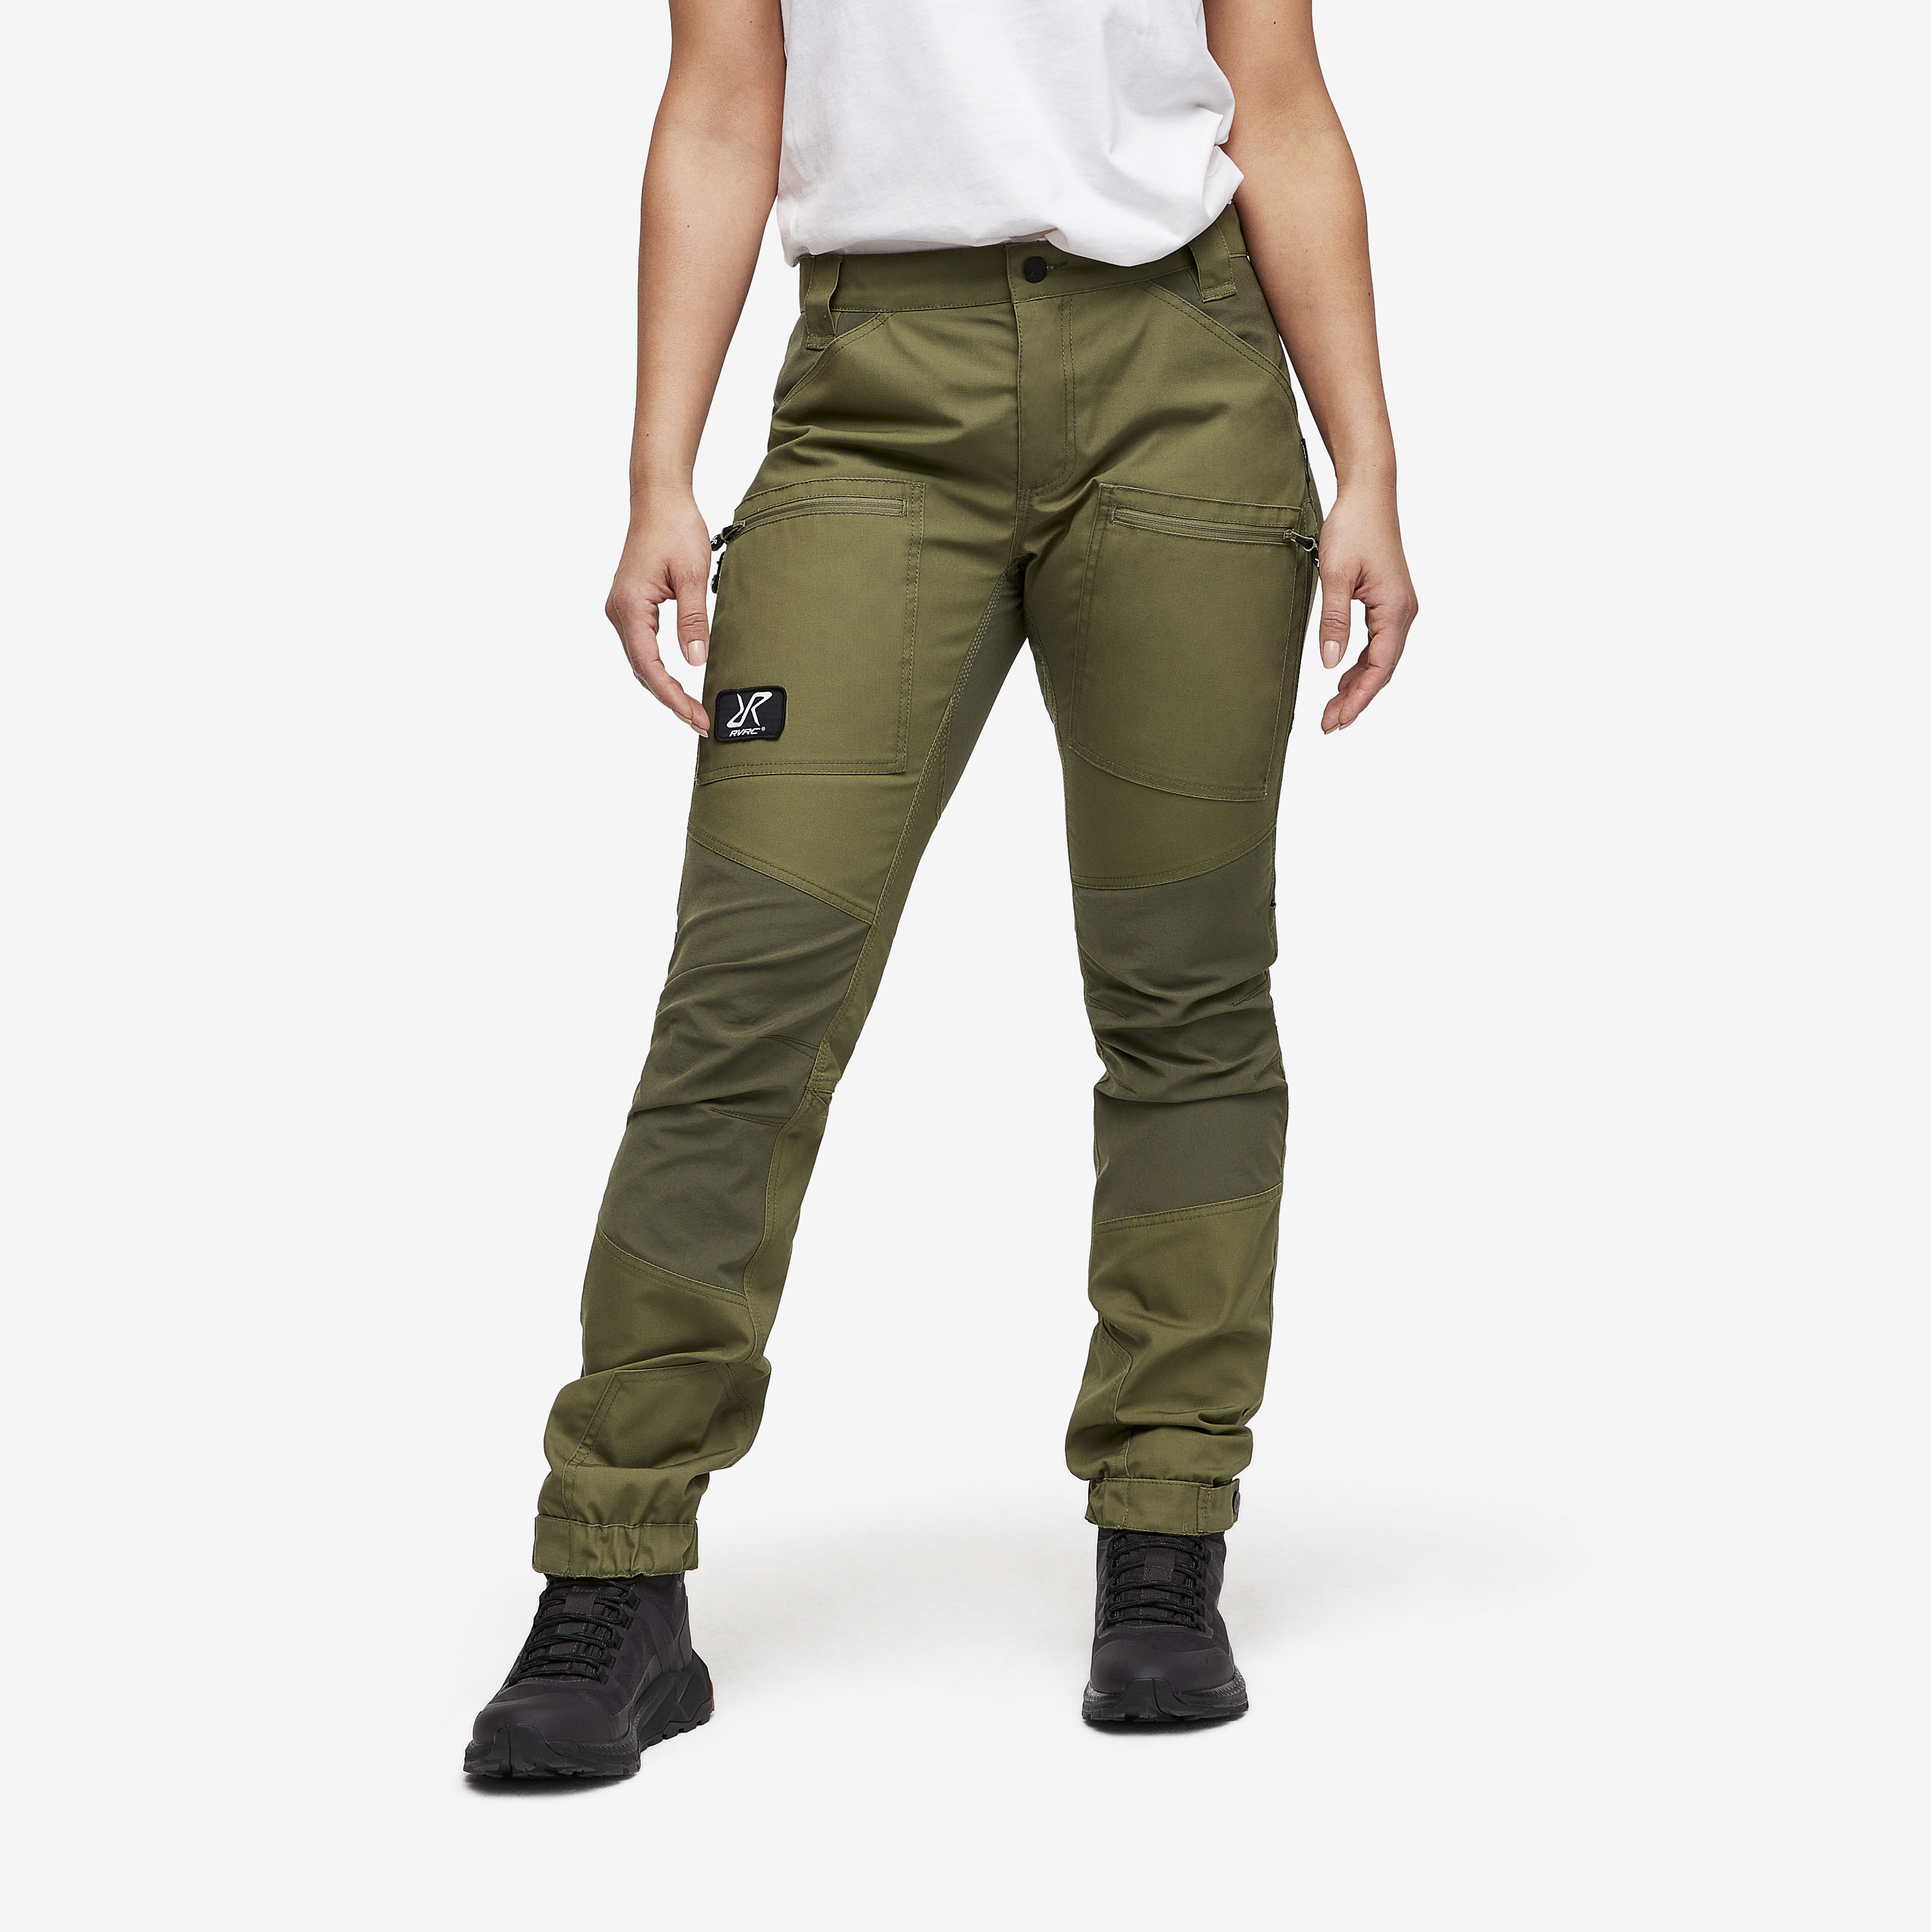 Nordwand Pro Trousers Burnt Olive Women